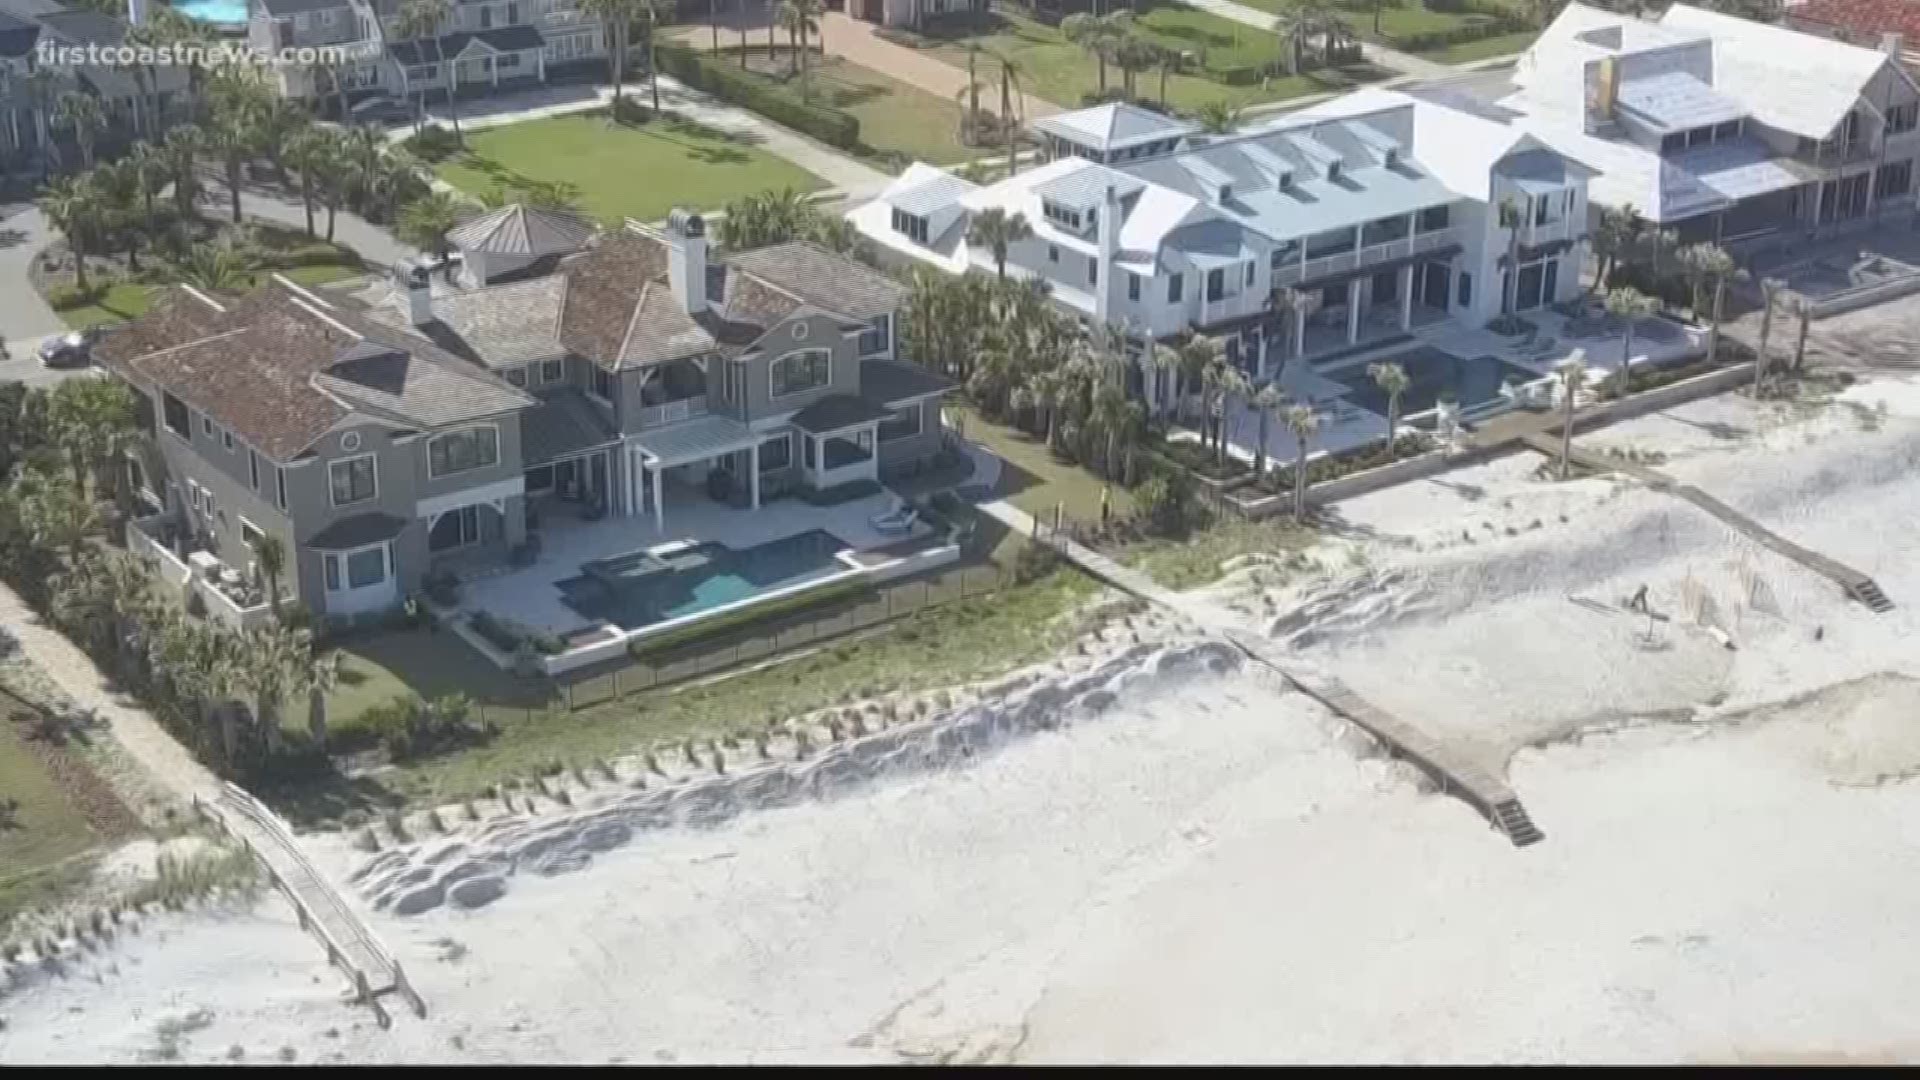 United Airlines CEO's home is among 4 receiving warnings from state for removing sand from beach